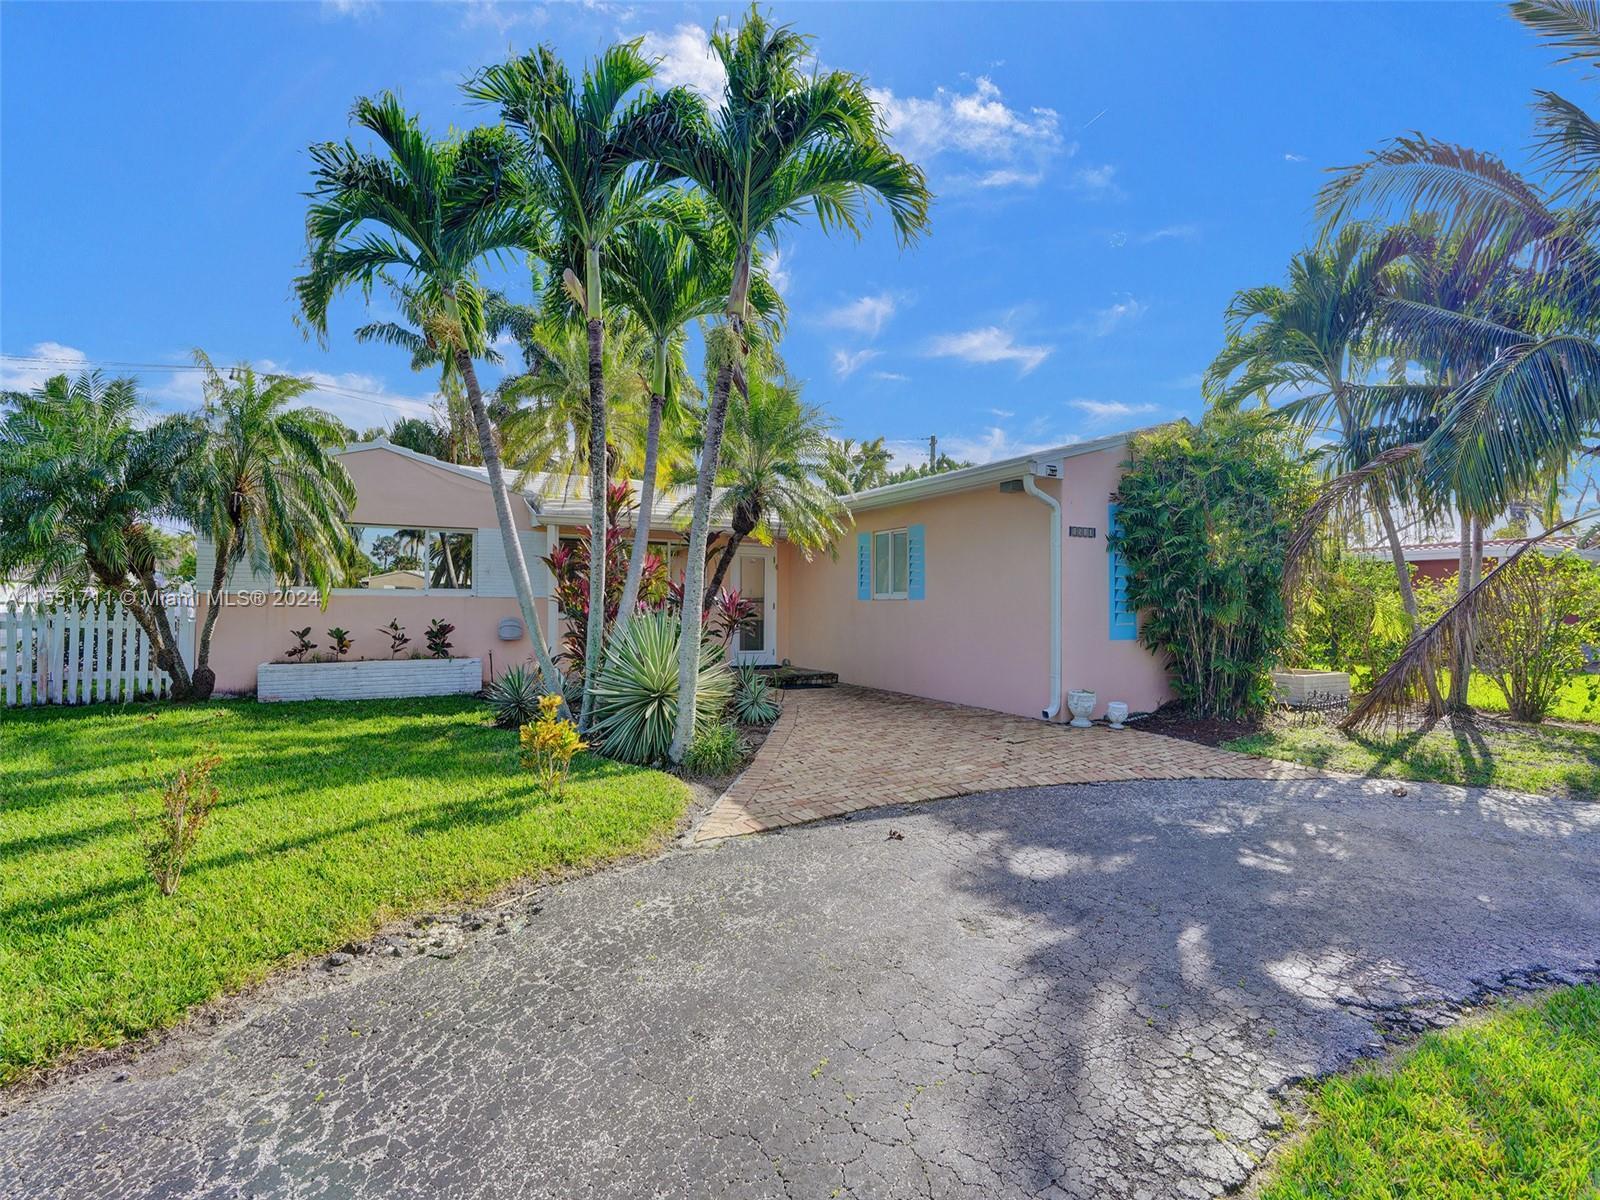 Photo of 1510 Coolidge St in Hollywood, FL